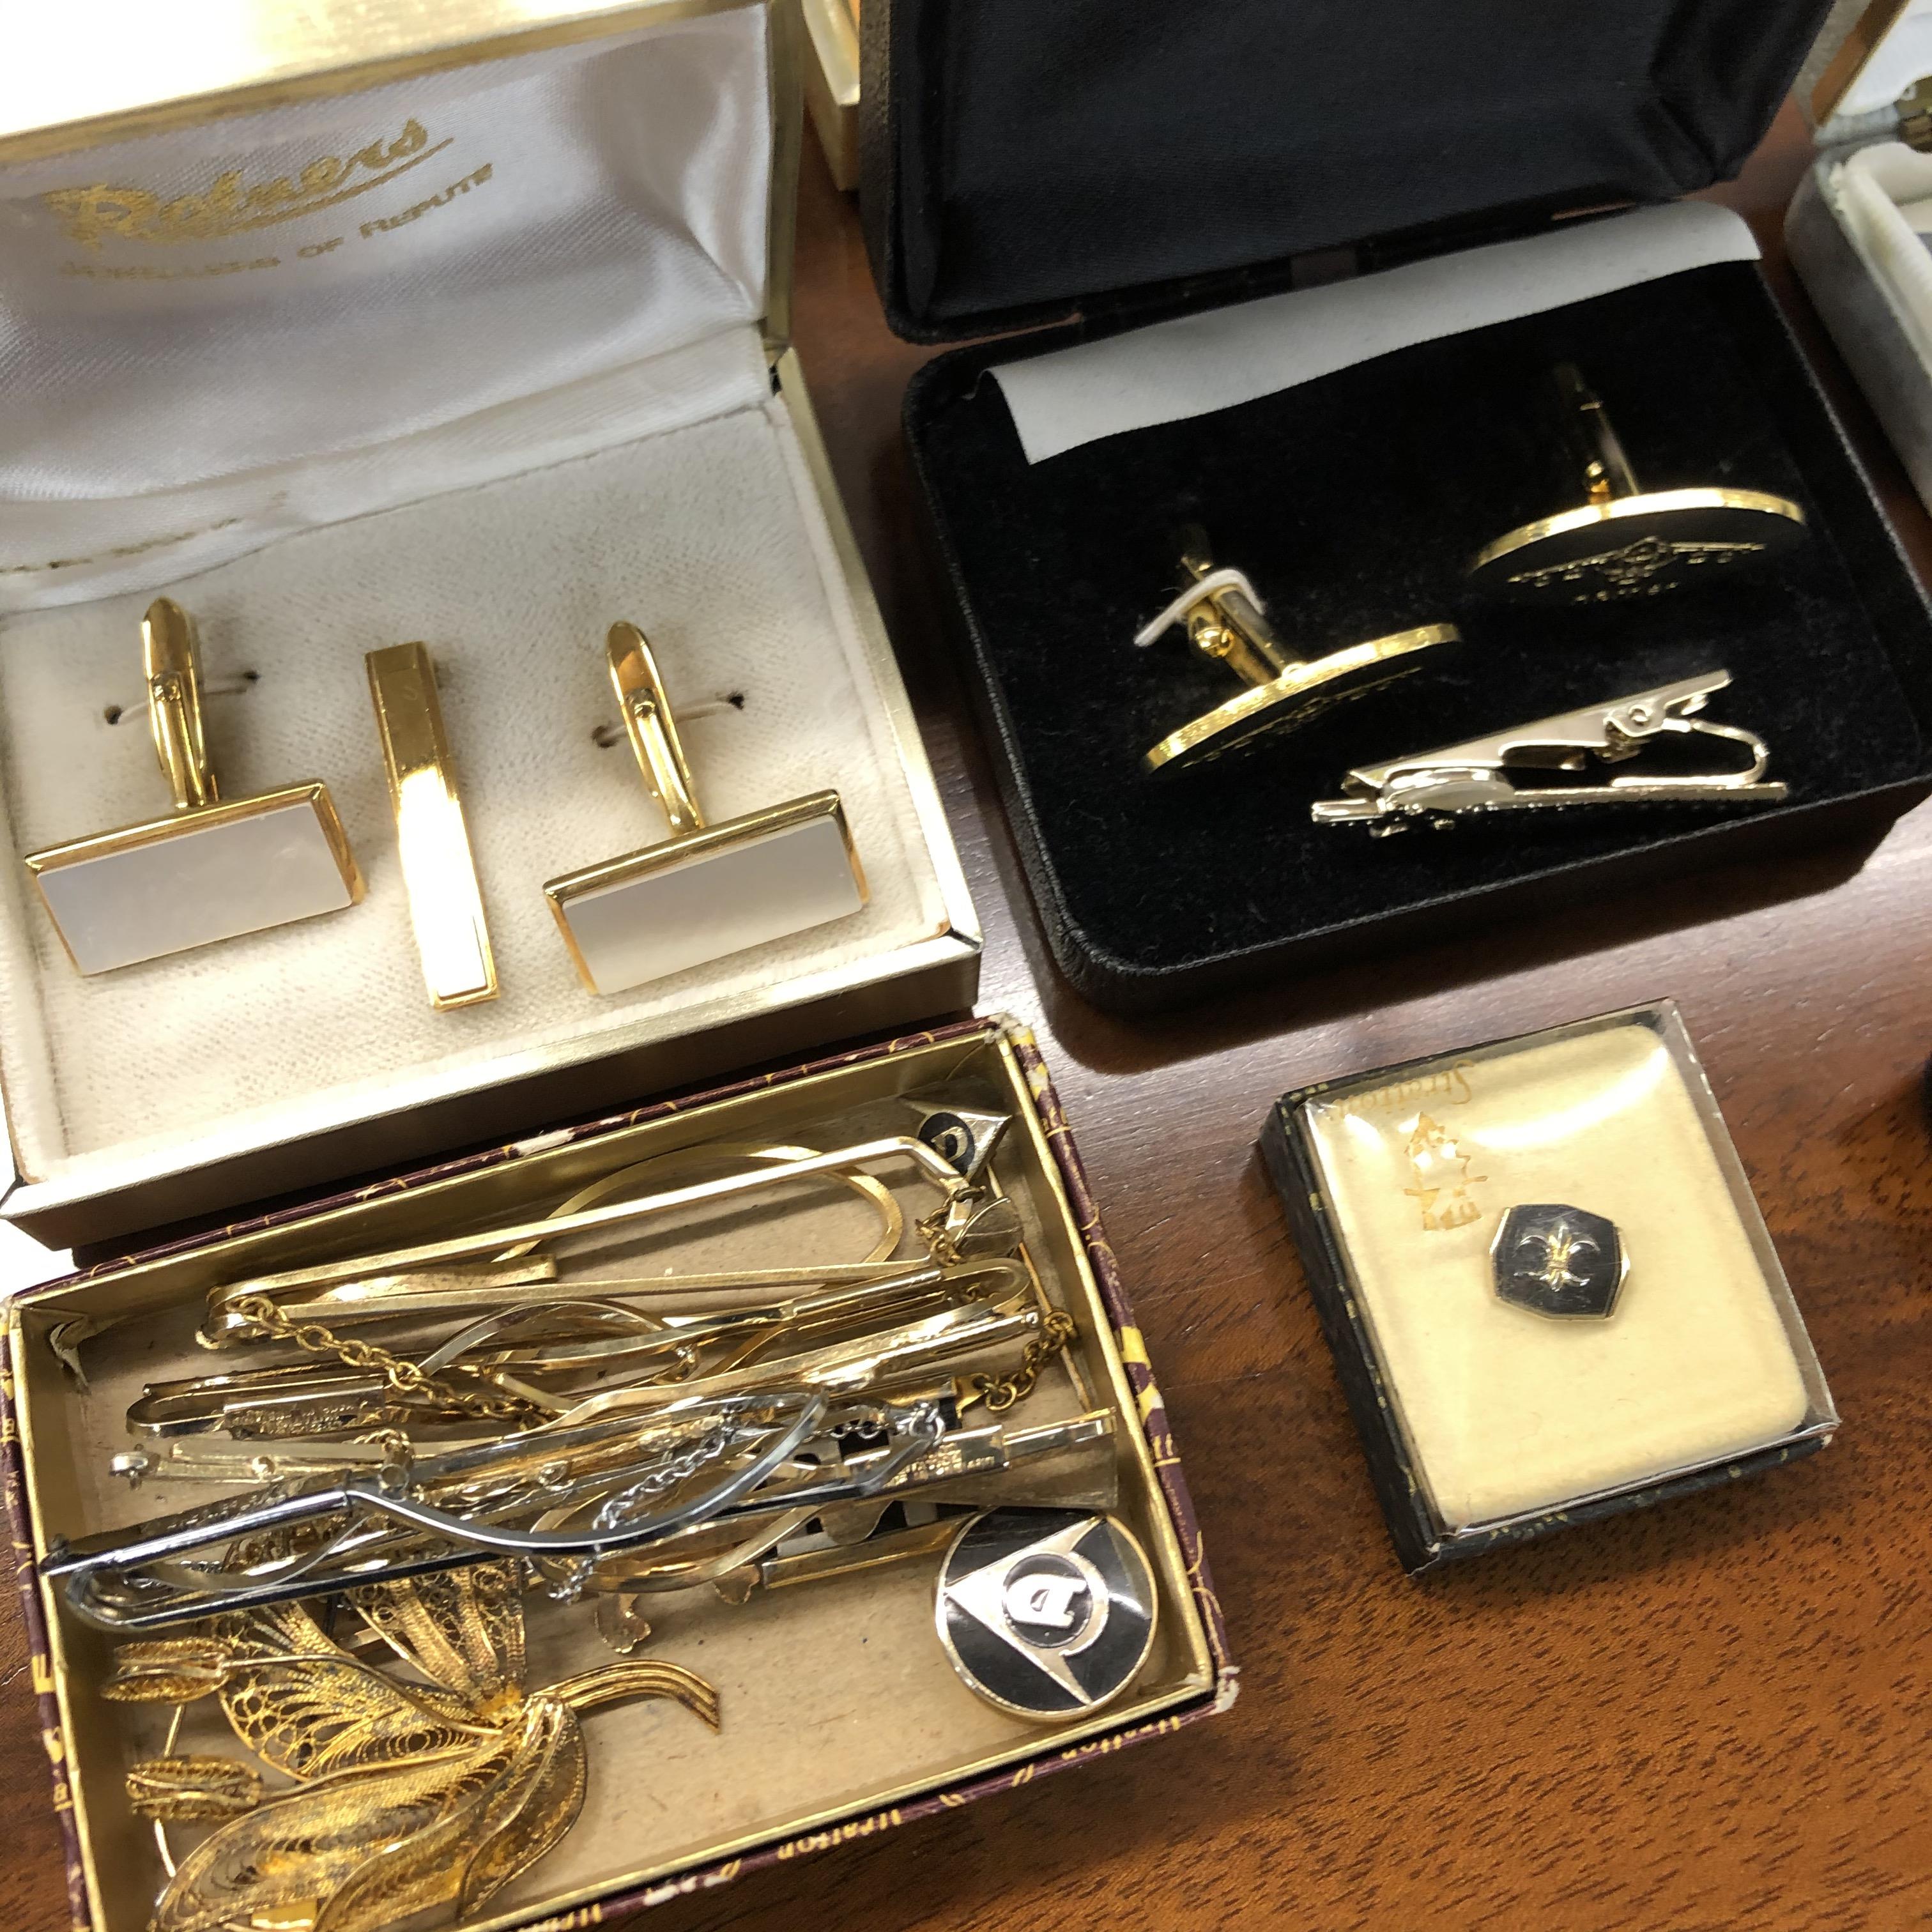 SELECTION OF BOXED CUFFLINK SETS, GOLD PLATED AND CHROMIUM PLATED TIE SLIDES, - Image 4 of 4